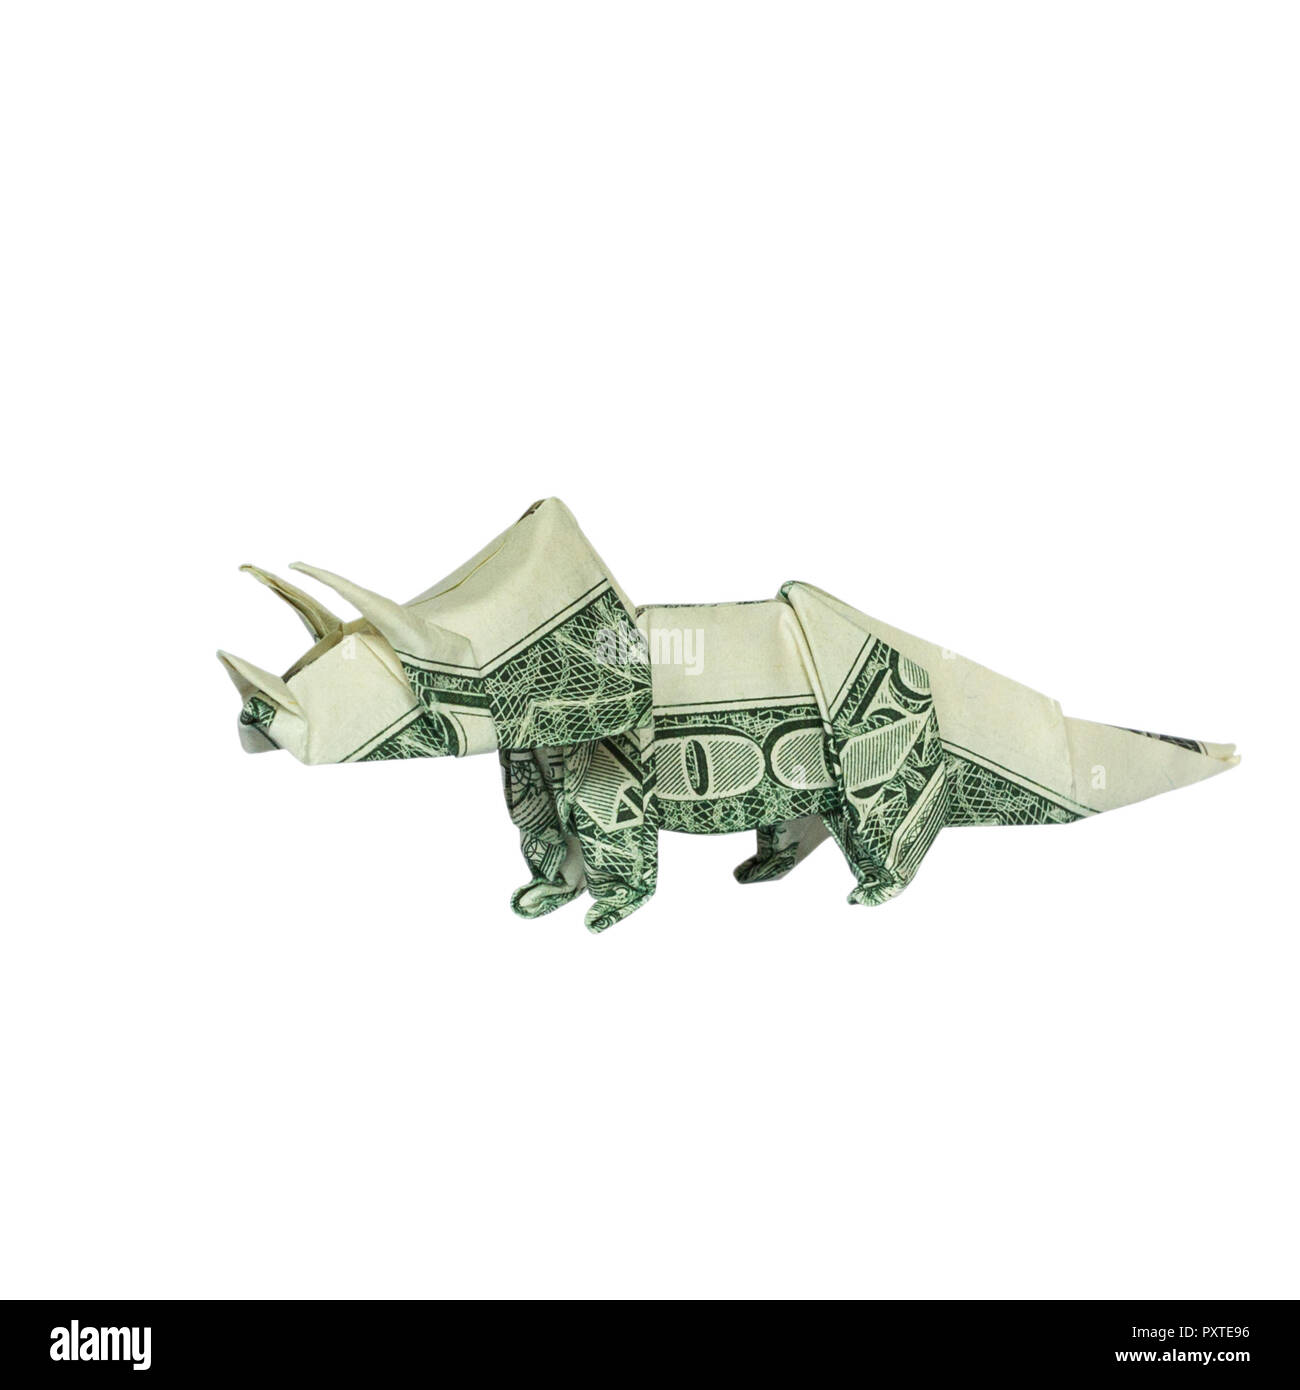 Money Origami Triceratops Dinosaur Folded with Real One Dollar Bill Isolated on White Background Stock Photo